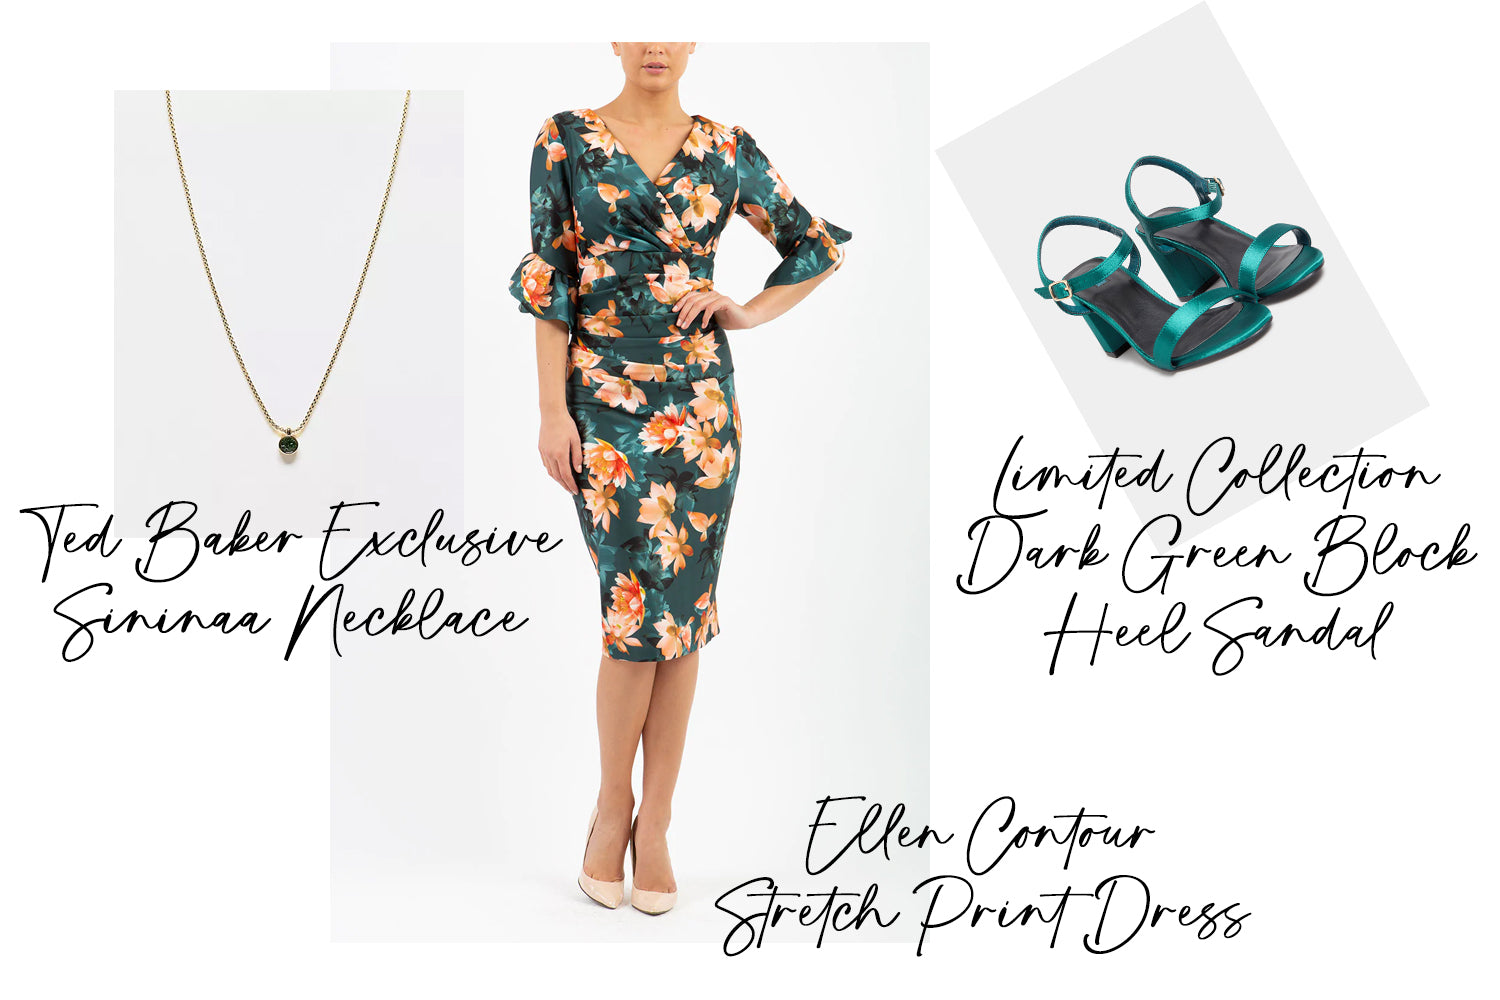 a range of images blended together to show the Ellen Contour Pencil dress, a pair of stiletto shoes and a green pendant necklace - all with text stating each item.